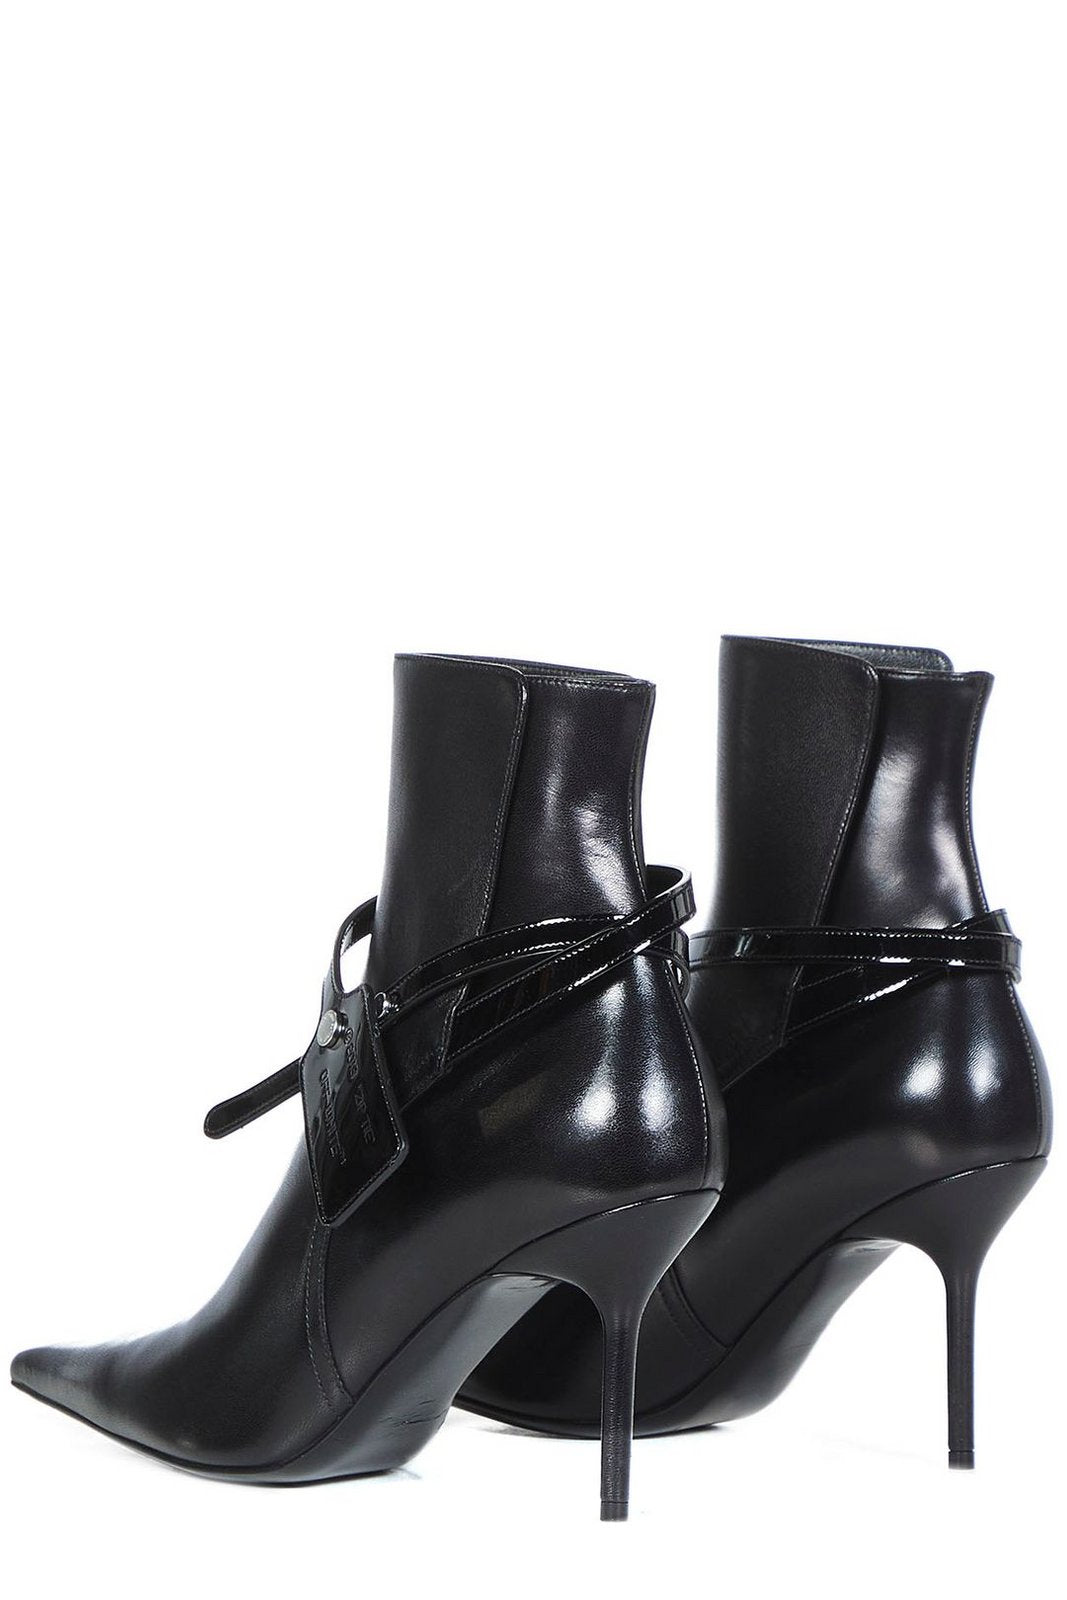 Off-White Logo Tag Pointed Toe Boots